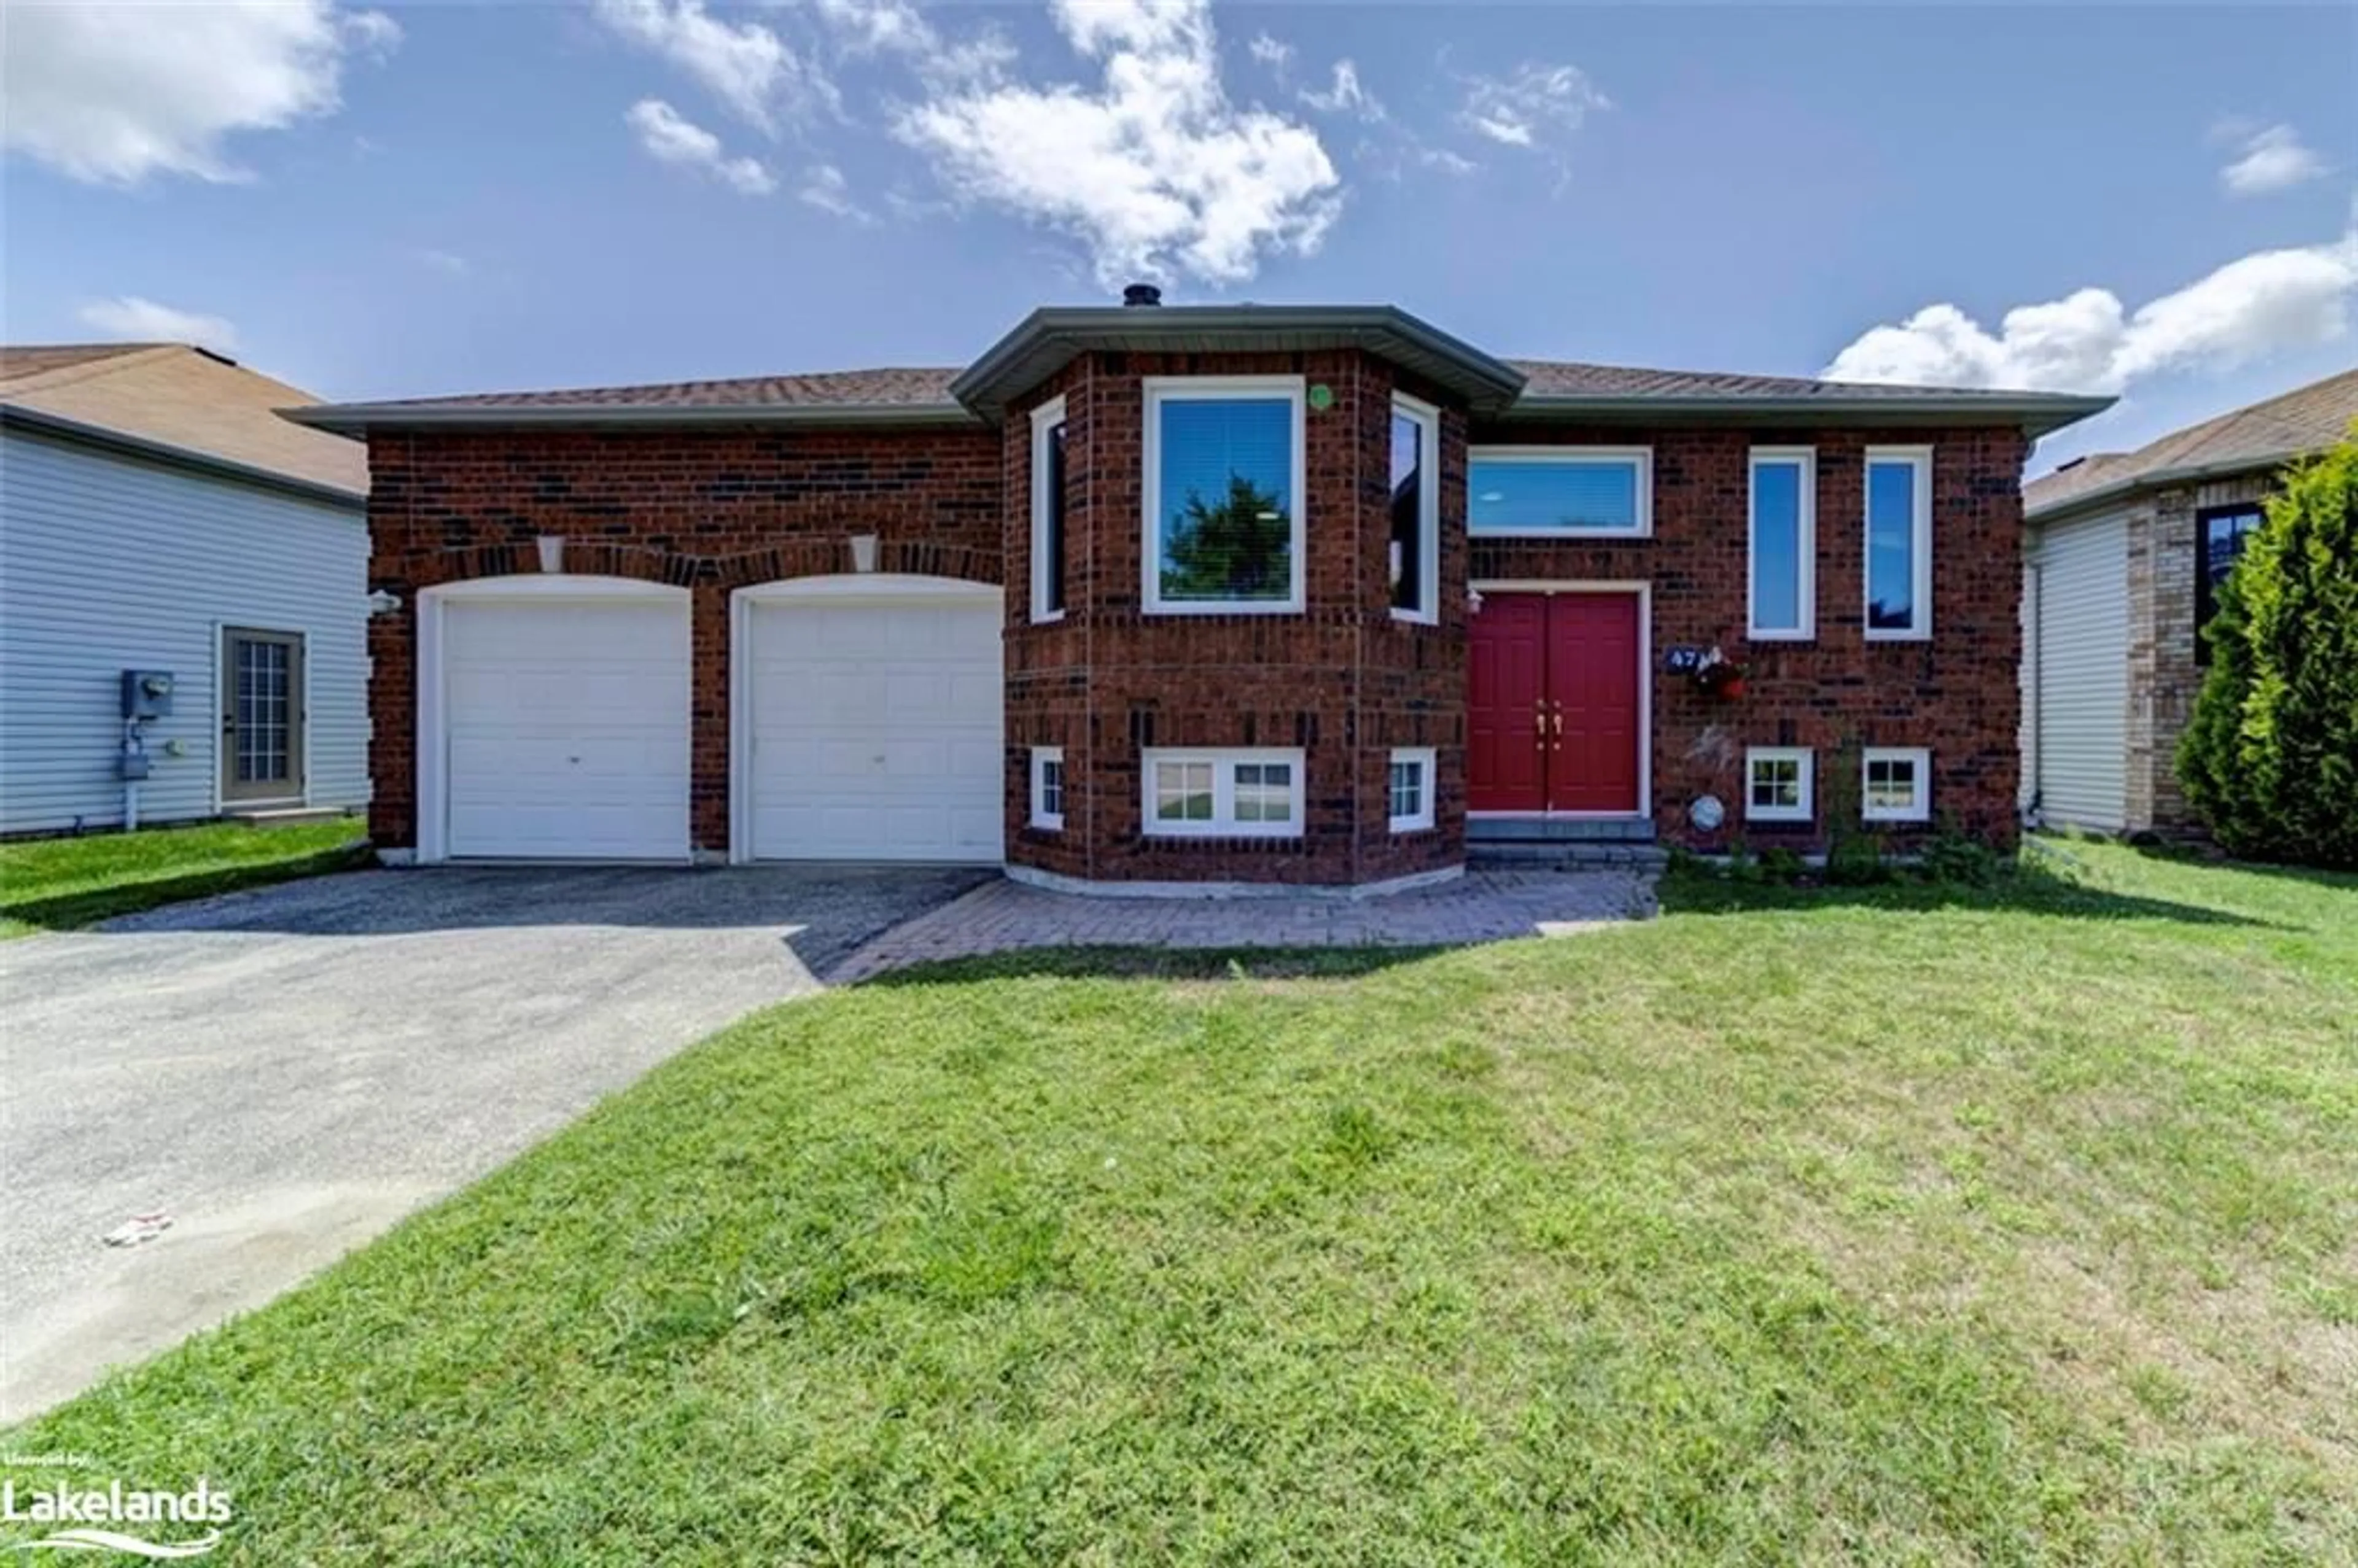 Home with brick exterior material for 47 Acorn Cres, Wasaga Beach Ontario L9Z 1L6